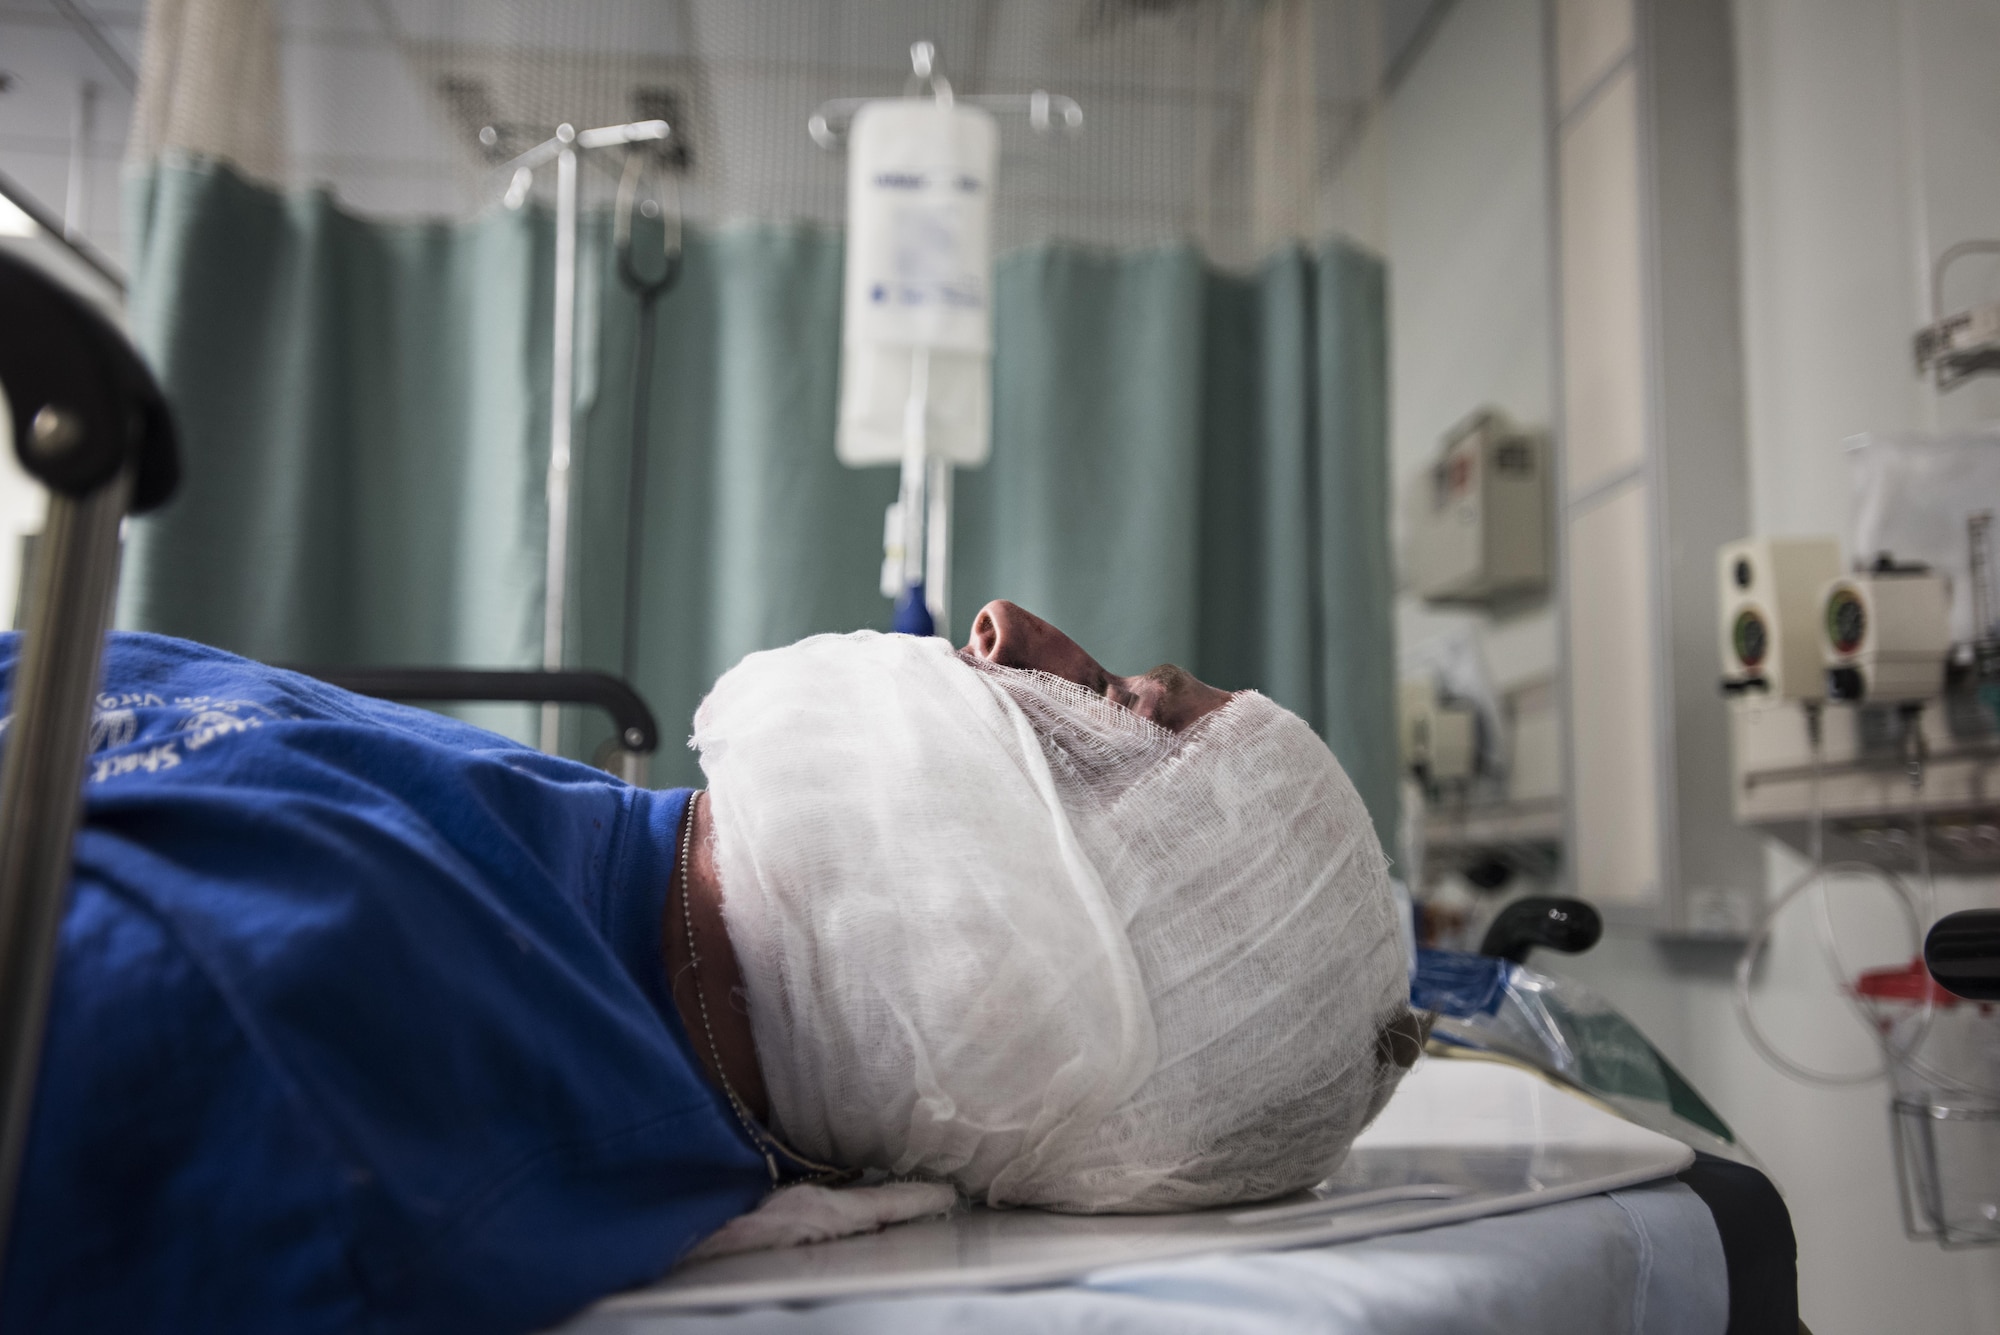 Dato Sherazio, a NATO civilian at the embassy in Kabul, lies in the intensive care ward after being treated during a mass casualty exercise at the Craig Joint Theater Hospital, Bagram Airfield, Afghanistan, Oct. 30, 2016. Volunteer patients applied moulage, makeup made to look like realistic injuries, at the embassy in Kabul and were then evacuated via helicopter to CJTH at Bagram. (U.S. Air Force photo by Staff Sgt. Katherine Spessa)
